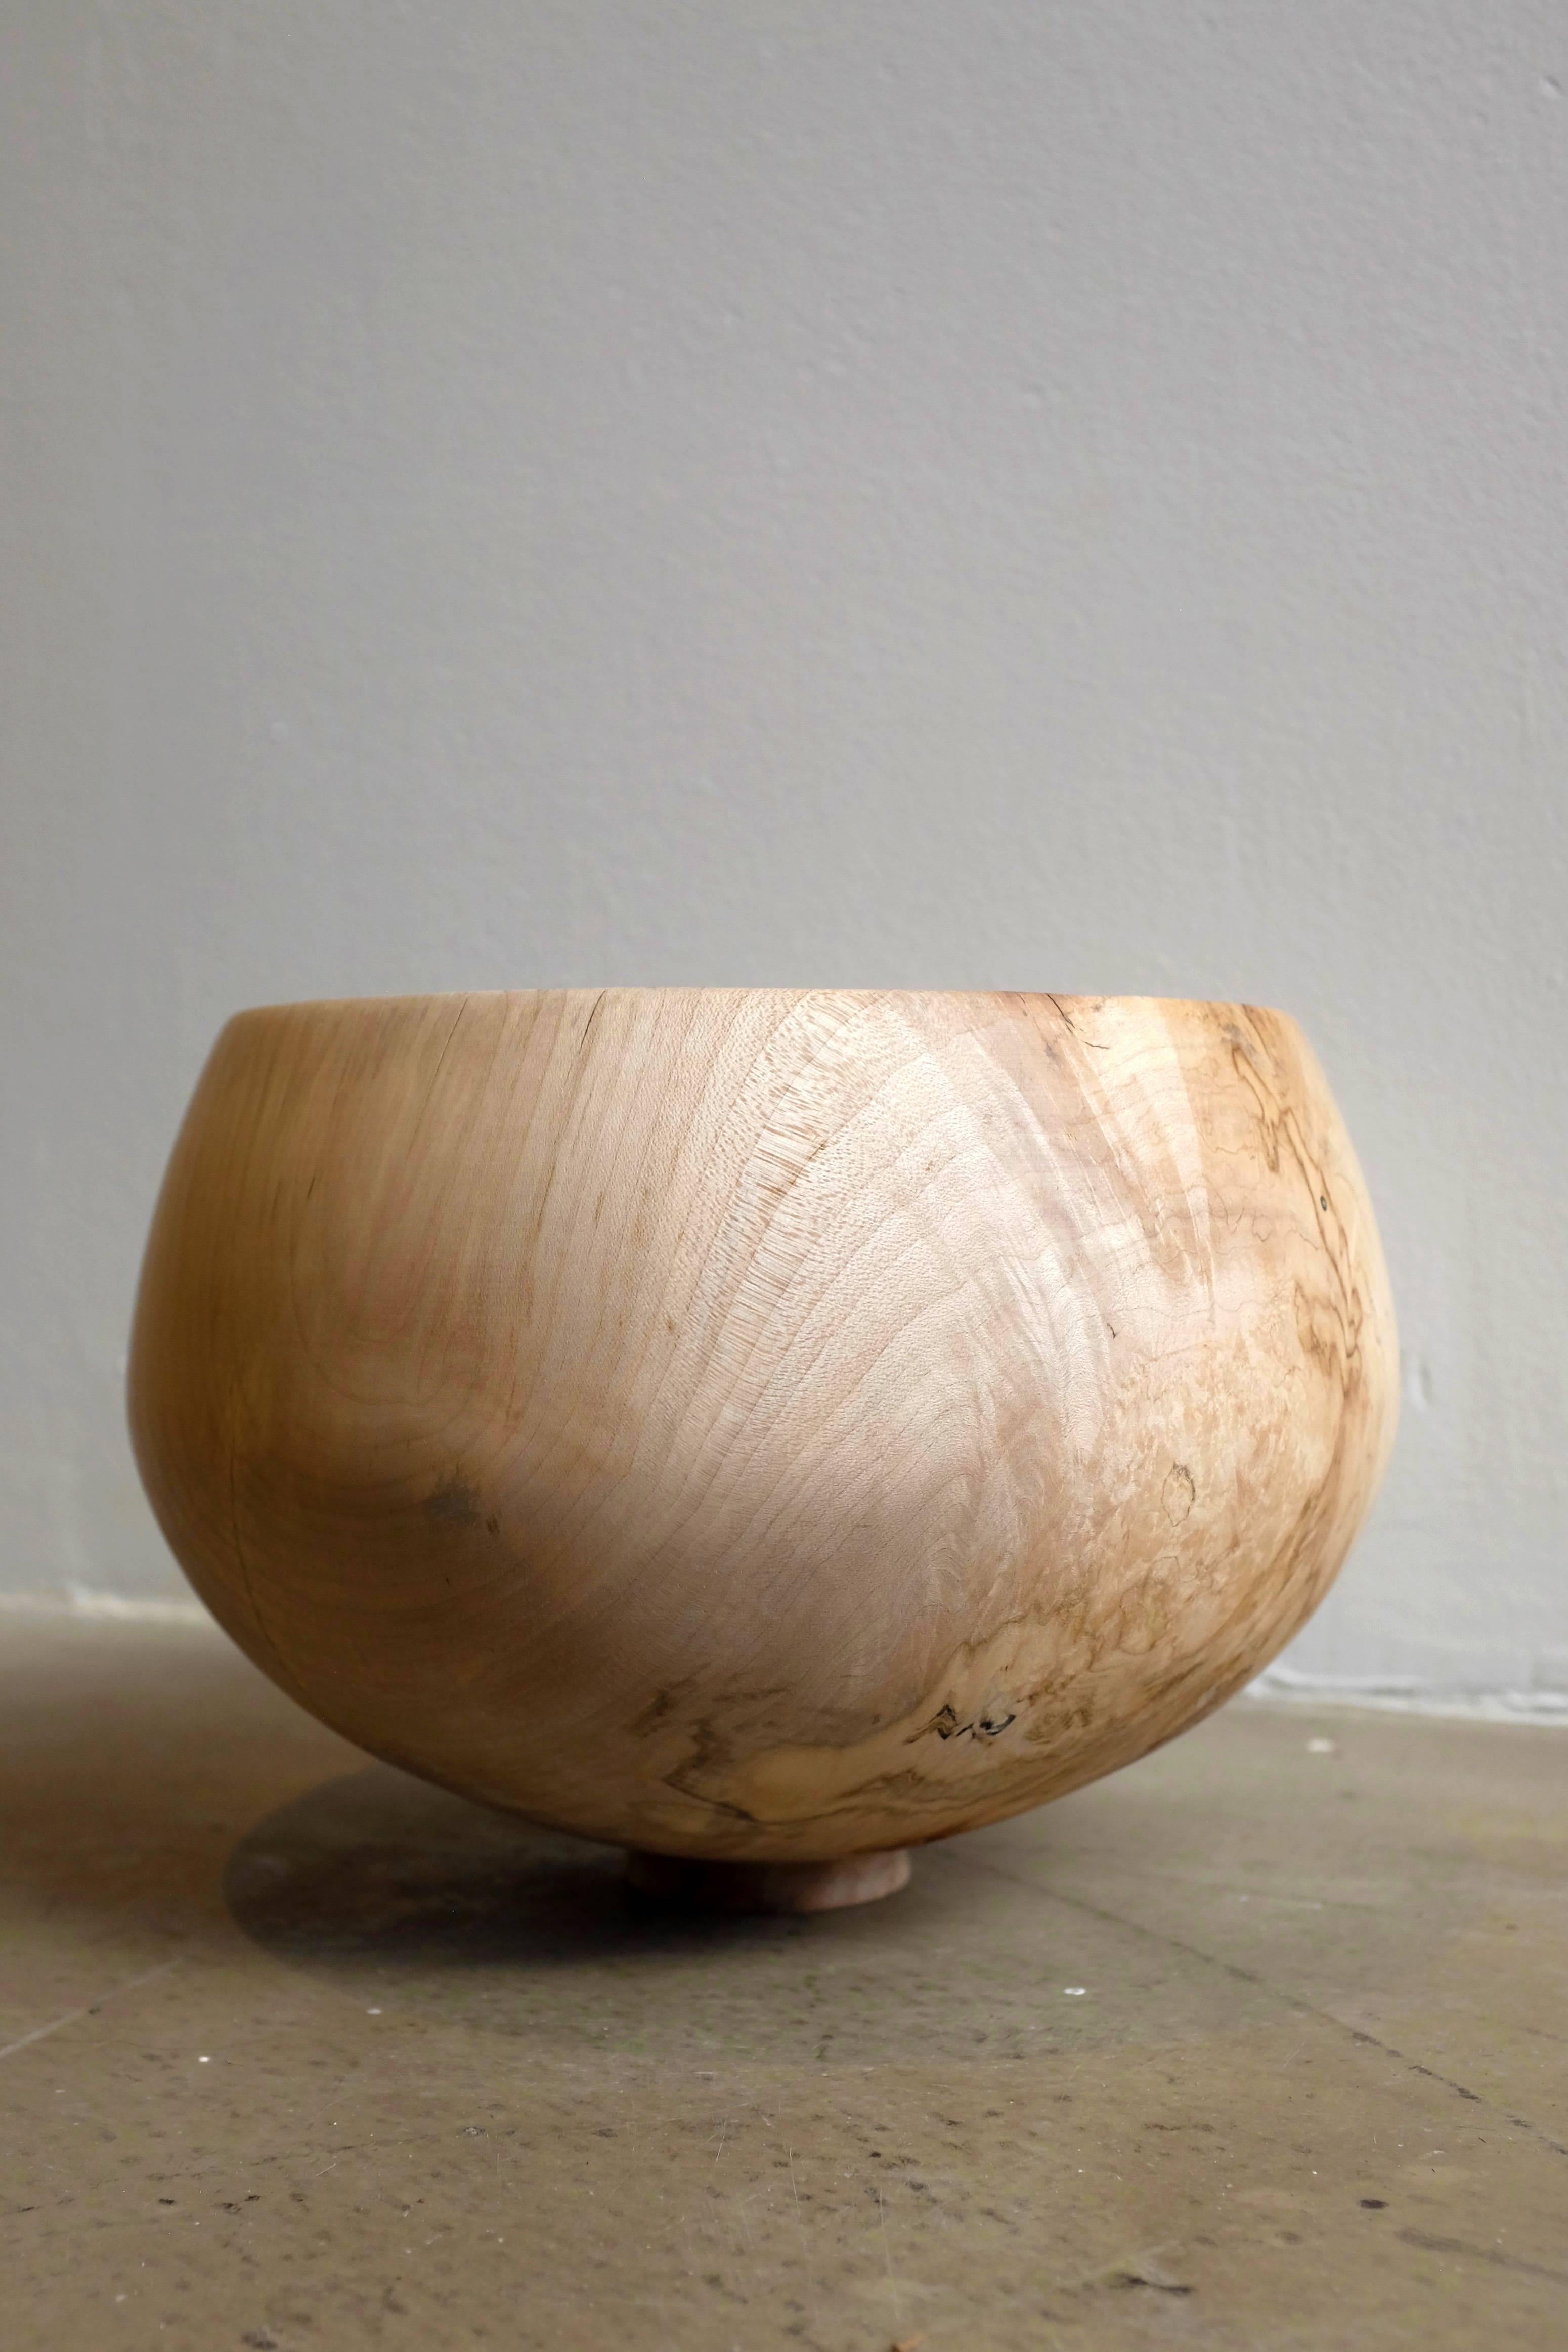 Light and beautifully textured, these sycamore offering bowls swell in shape and each live on a narrow, sturdy foot. Hand-turned, the vases' textures are smooth and inviting as the sycamore wood creates ripples and spots that catch light, presenting